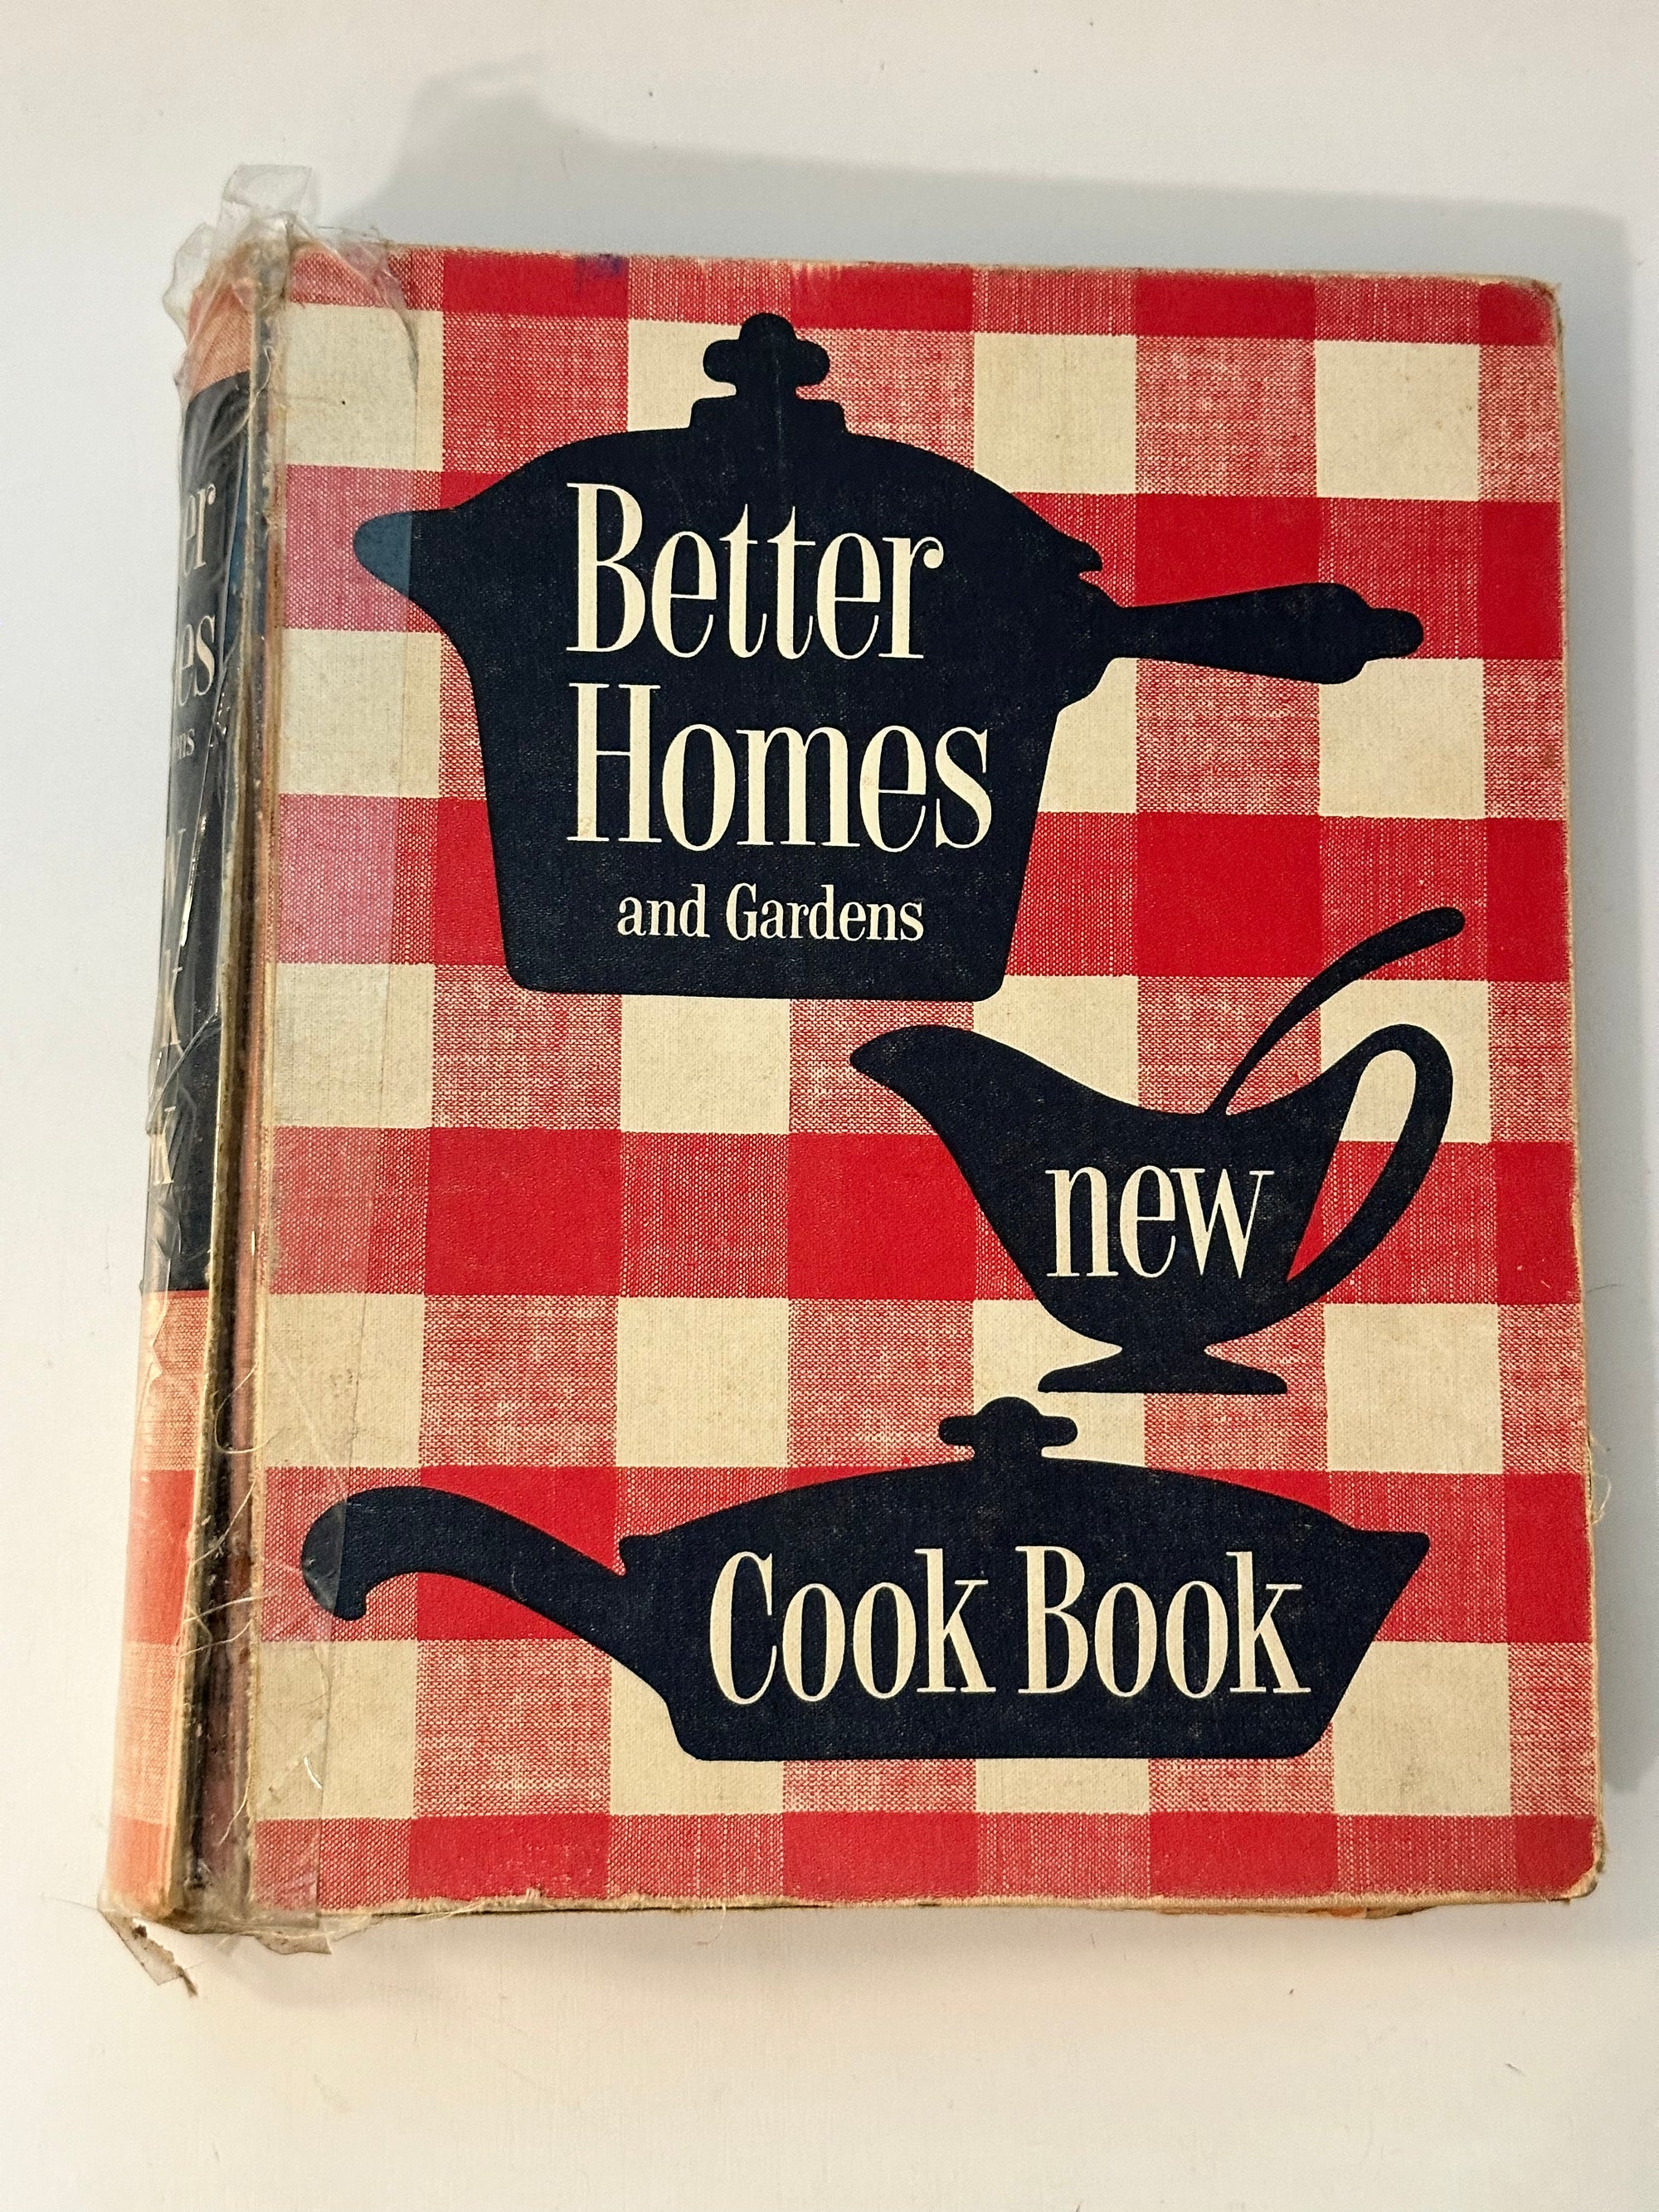 1953 Better Homes and Gardens new cookbook